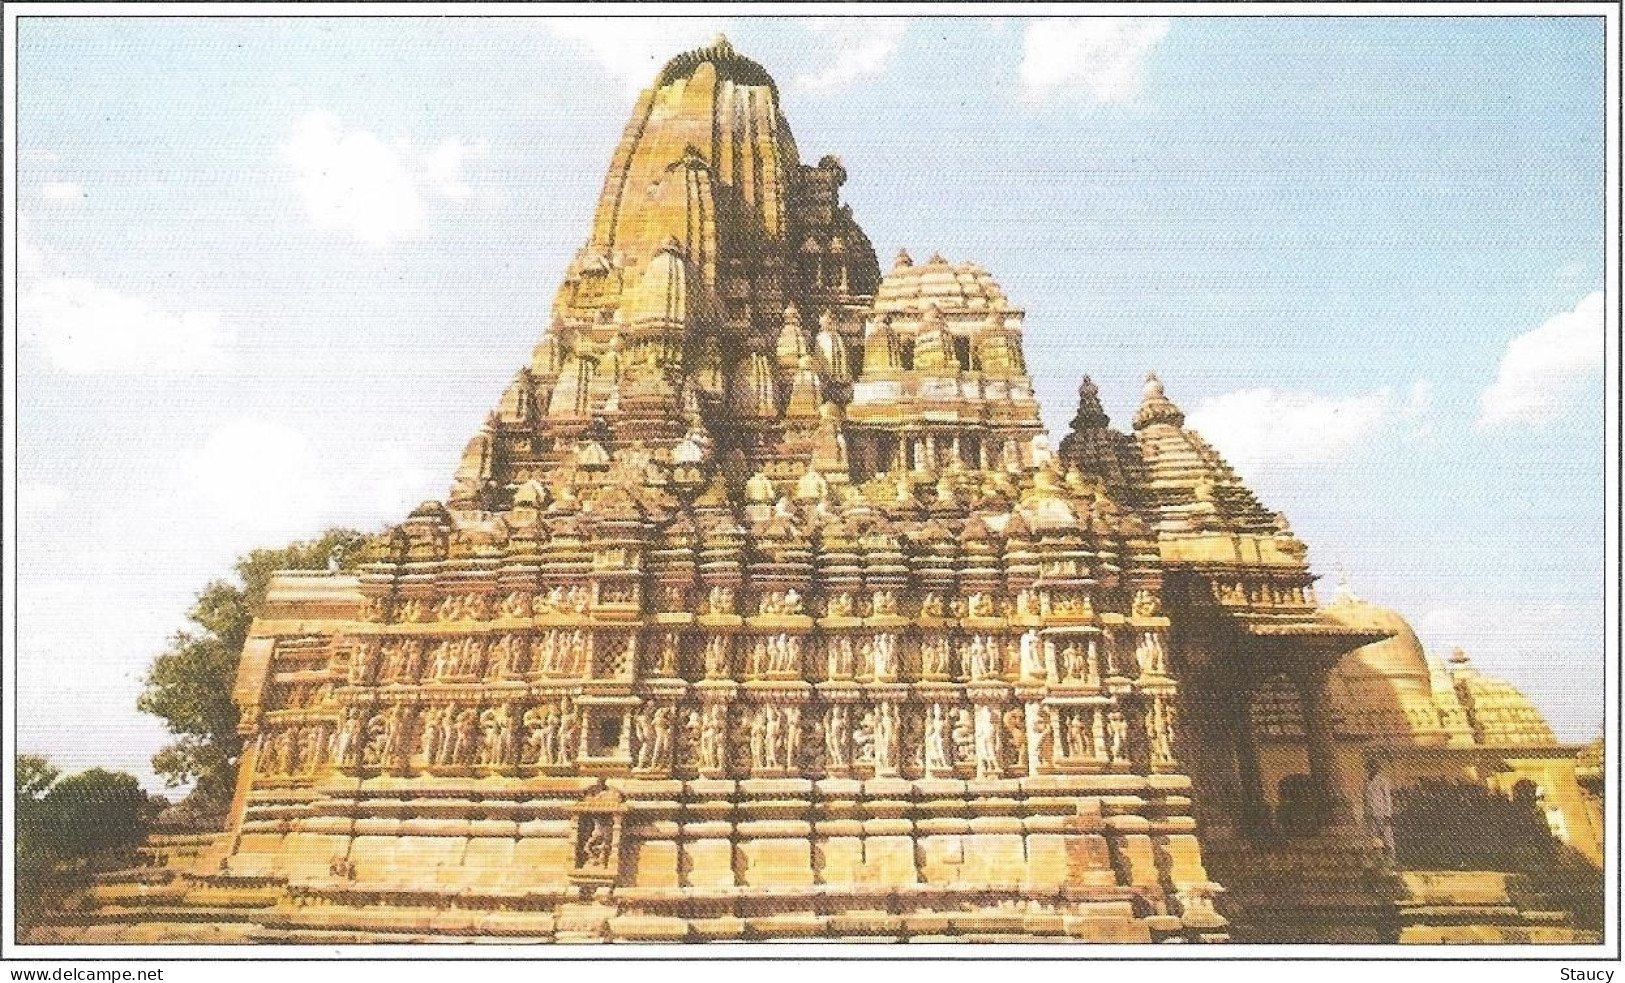 India Khajuraho Temples MONUMENTS - PARSVANATH Temple Of The Eastern Group Picture Post CARD New As Per Scan - Hinduismus